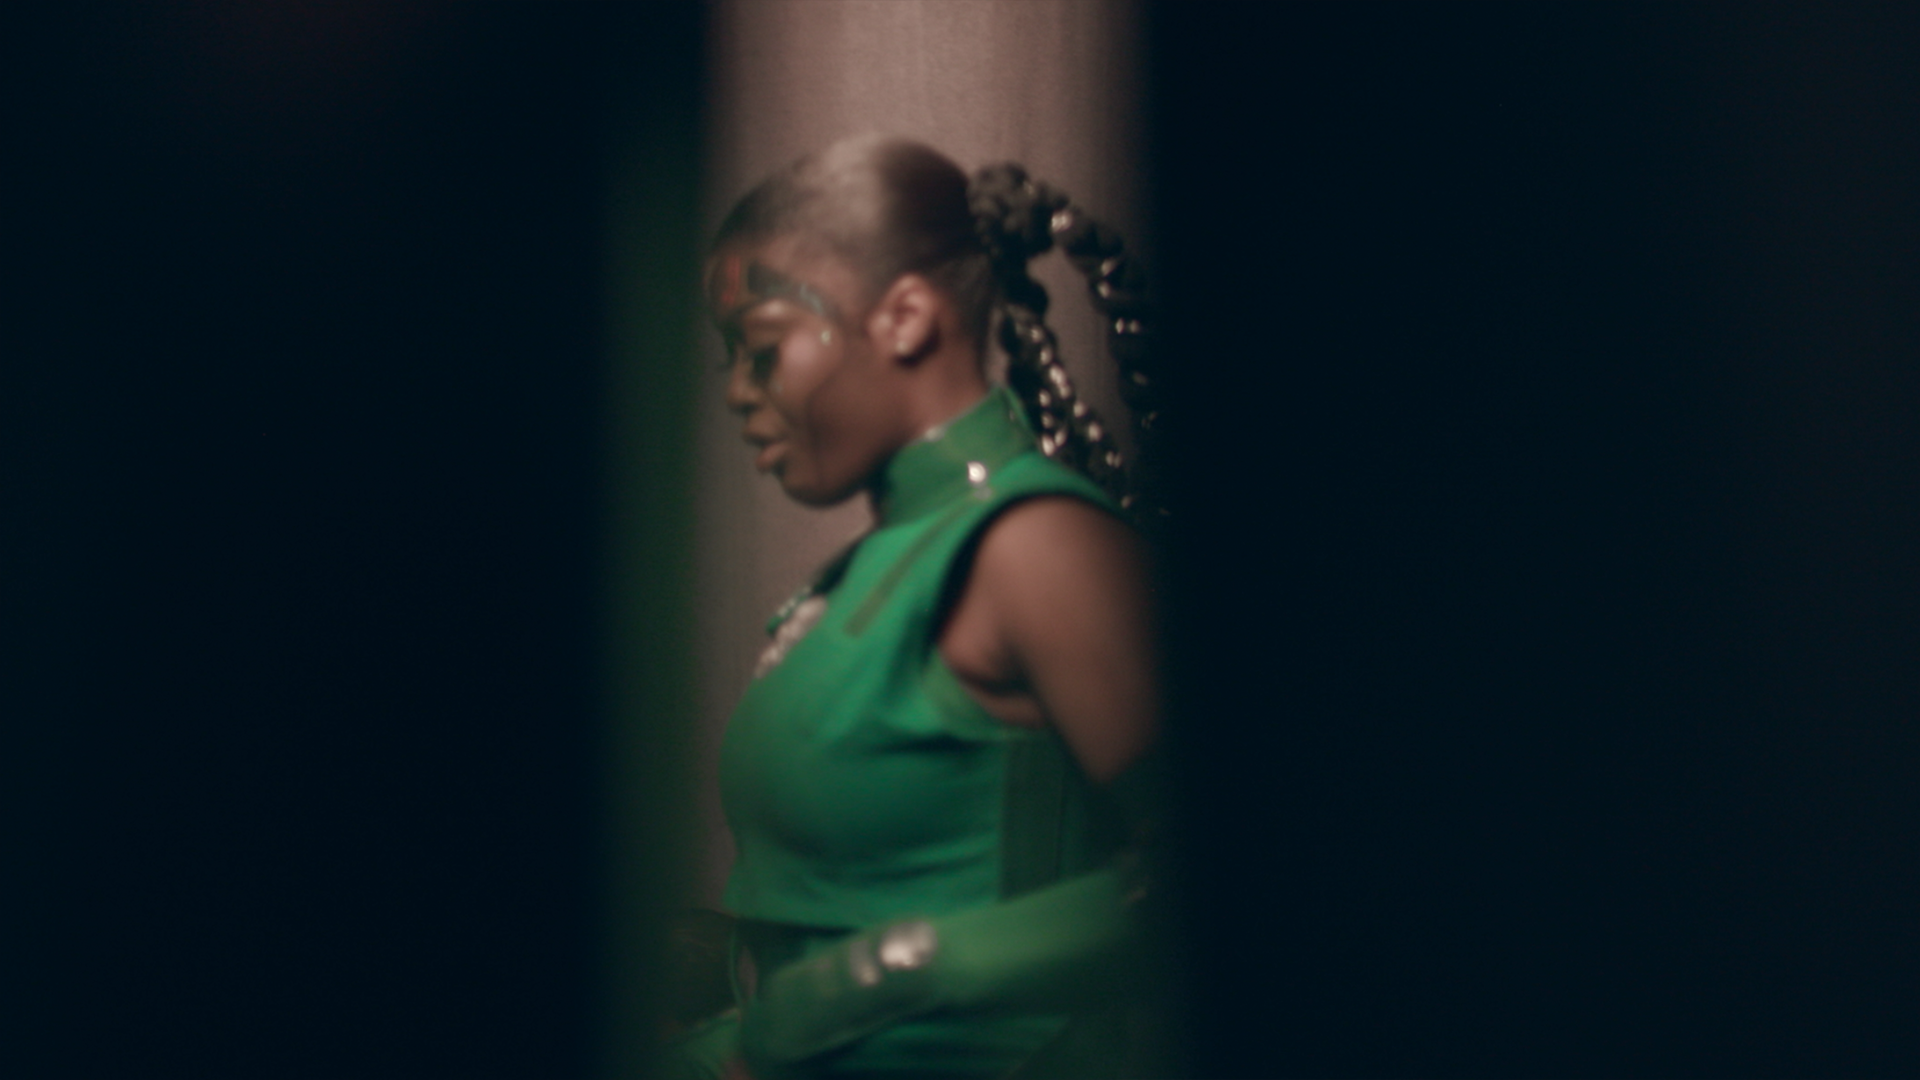 Rapper Tierra Whack dressed in a futuristic green outfit with braids entwined with gold material down her back.